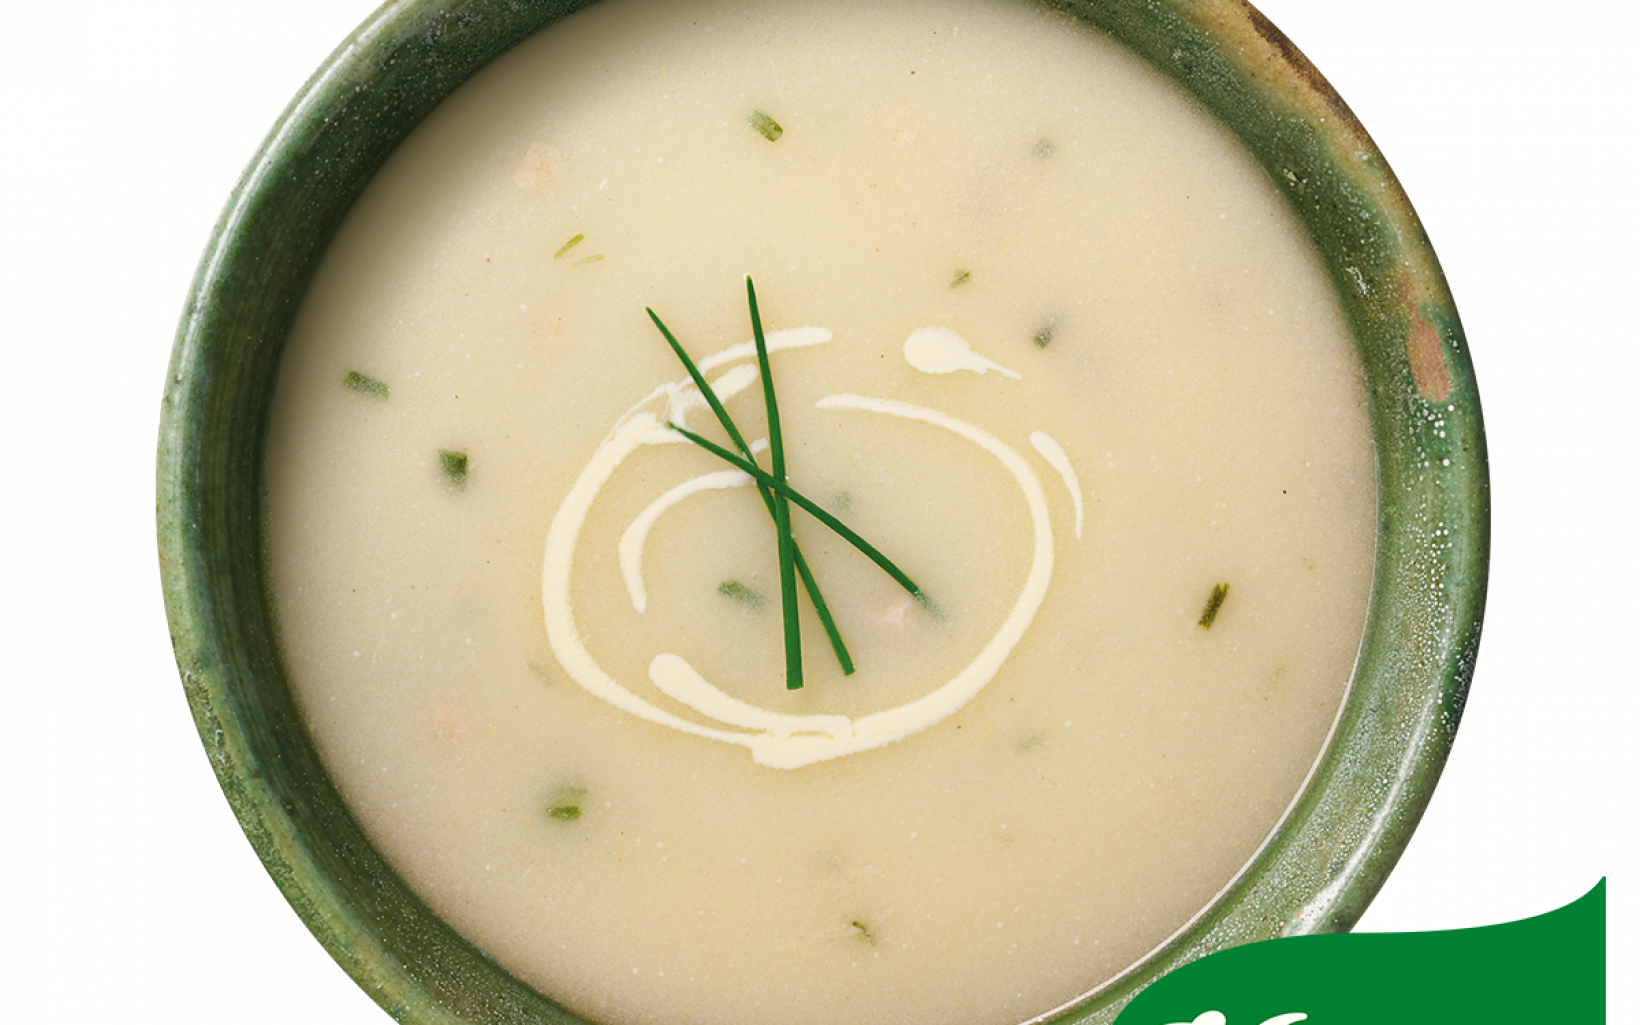 67158 Uk Knorr Classic Cream Of Chicken Soup With Logo Supp Image 1200x1200px 20203pm